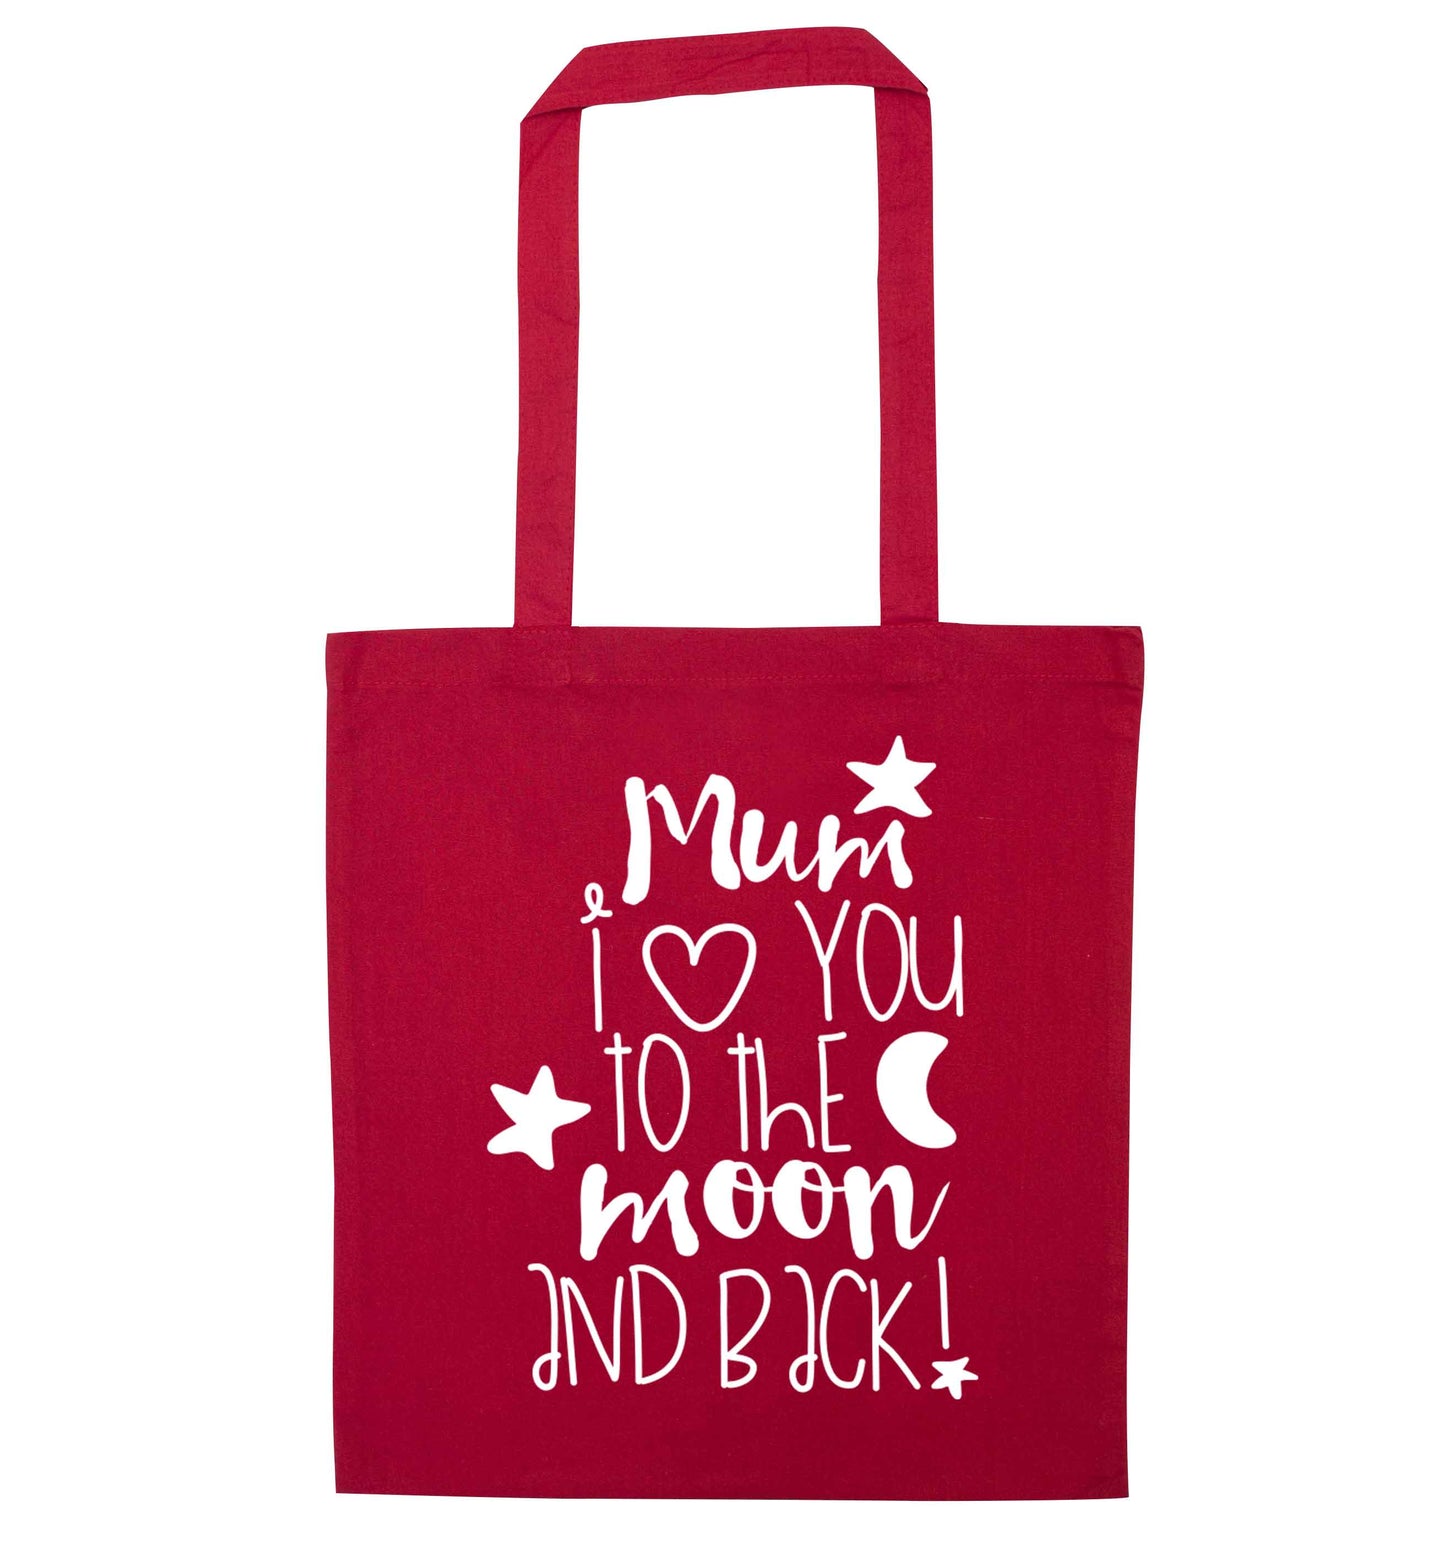 Mum I love you to the moon and back red tote bag